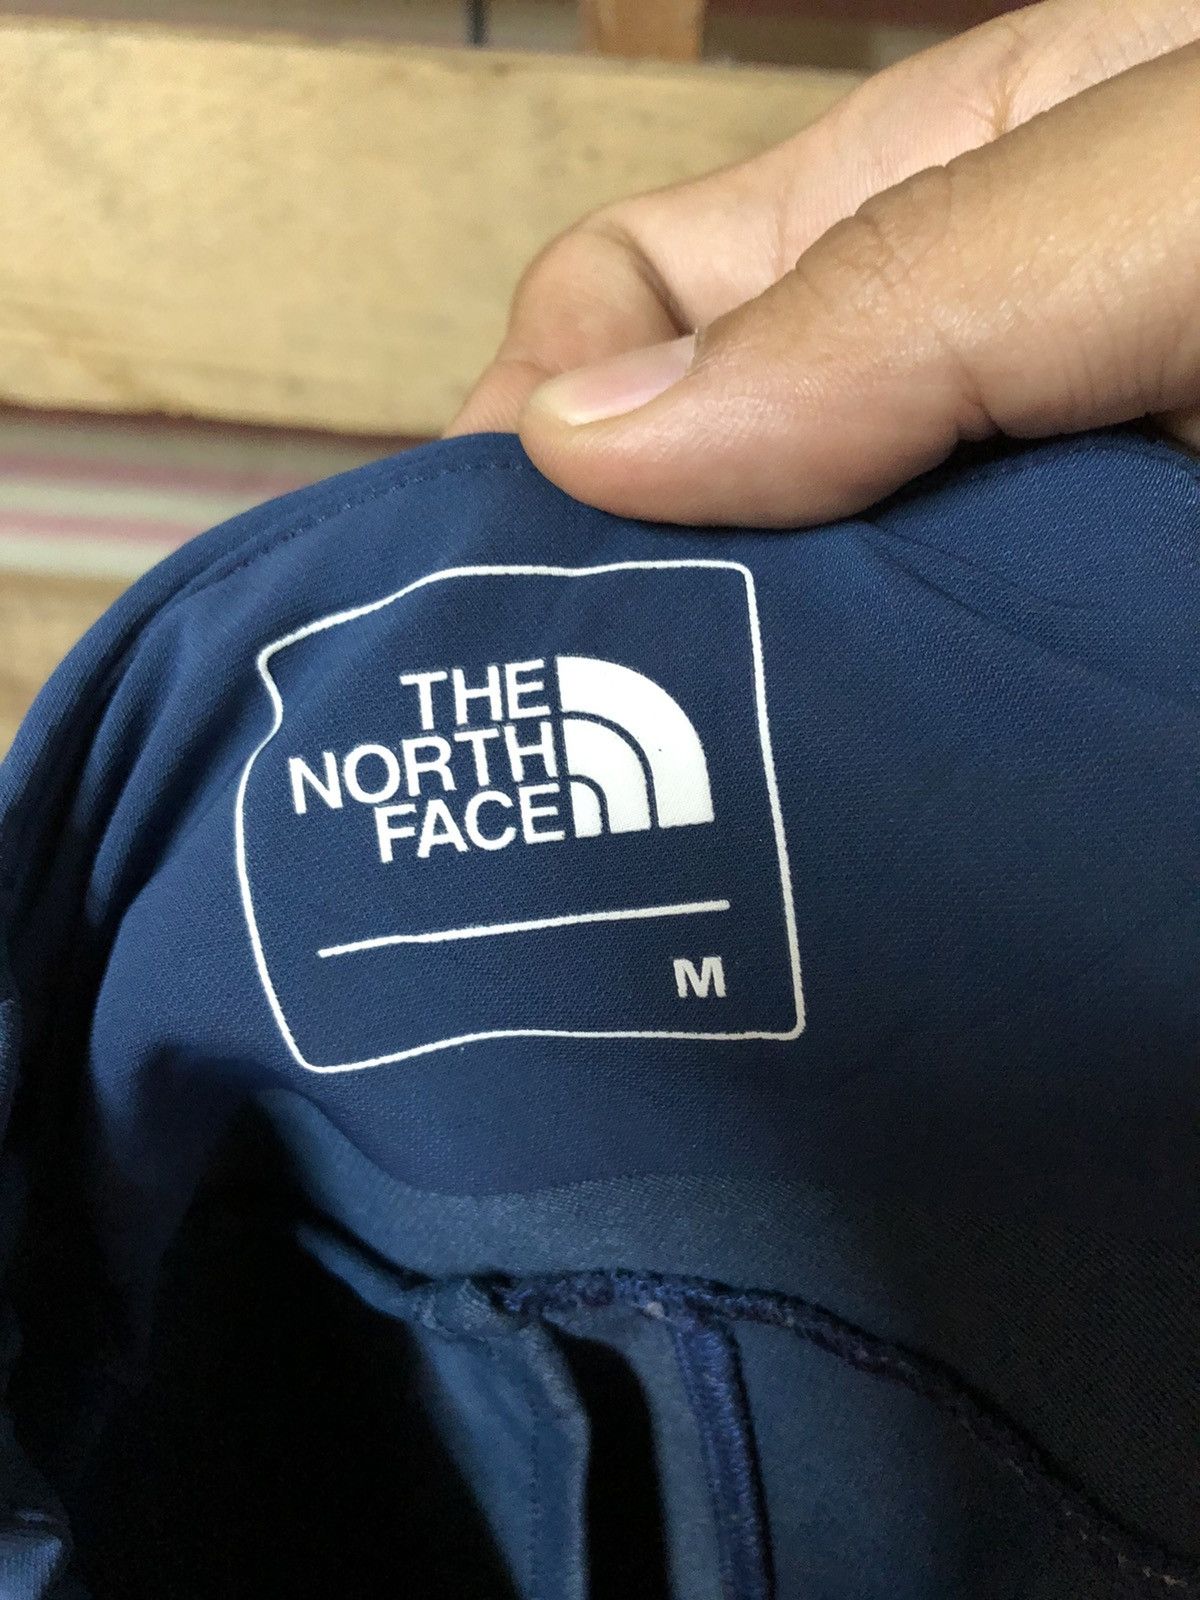 The North Face Plain Design Pant Stretch Like New Condition - 9